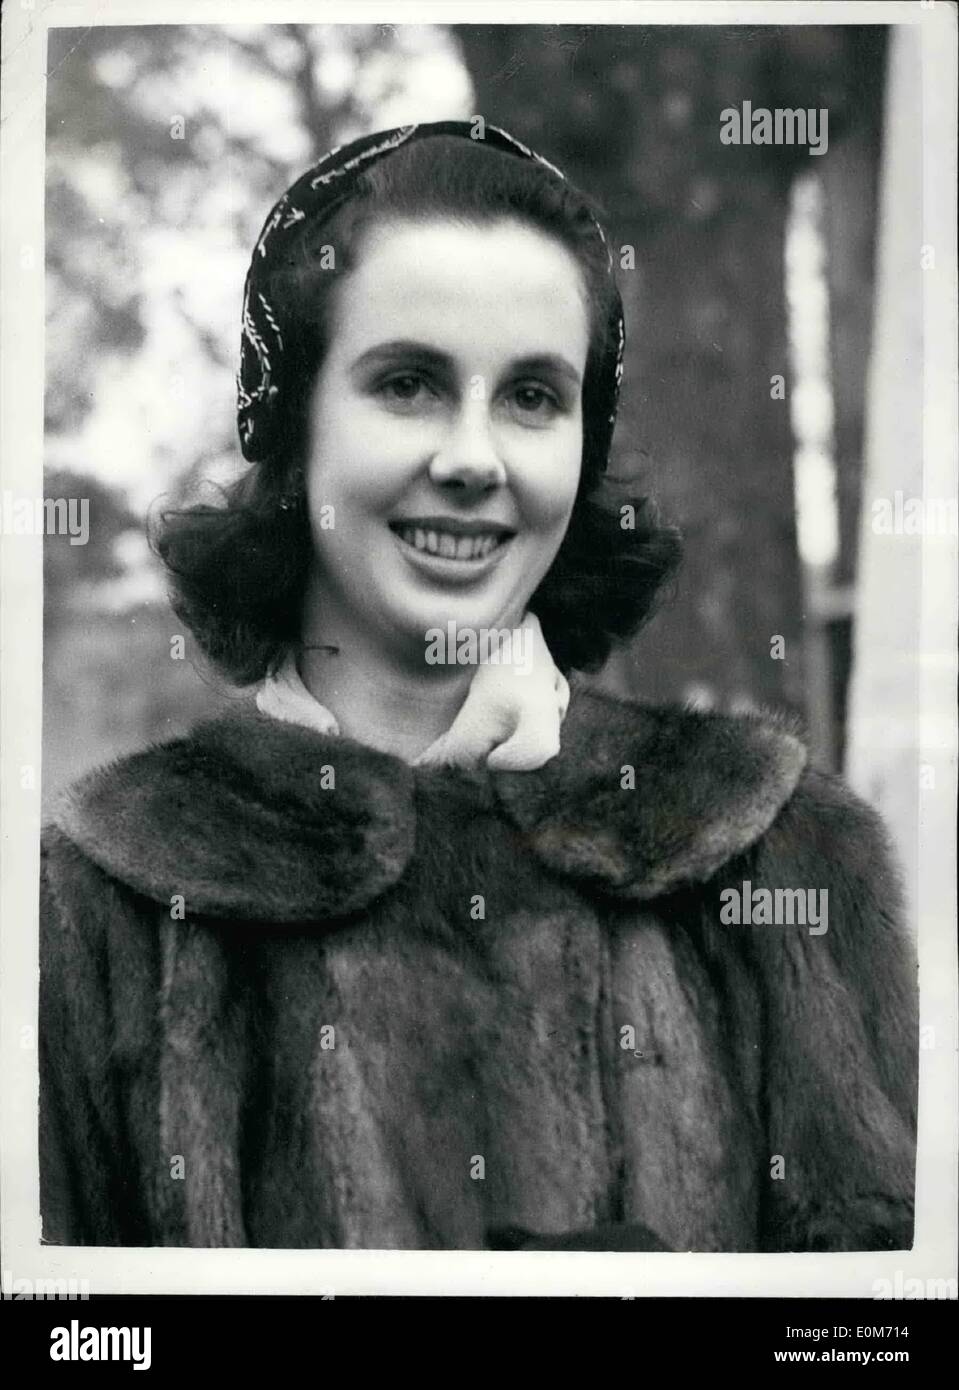 Nov. 11, 1953 - Wedding Rehearsal at St. Margaret's: Miss Teresa Fox-Strangways, 21 years old daughter of Lord and Lady Stravordale, who marries 23 year old Lord Galway, at St. Margaret's Westminster, tomorrow, went to a wedding rehearsal there this afternoon. Sh has seven child attendants, including Arabella, 3 year old daughter of Mr. And Mrs. Randolph Churchill. The three pages will wear uniforms as miniature life guards, the regiment to which Lord Galway belongs. Photo shows Tomorrow's bride, Miss Teresa Fox-Strangways photographed after the rehearsal at St. Margaret's today. Stock Photo